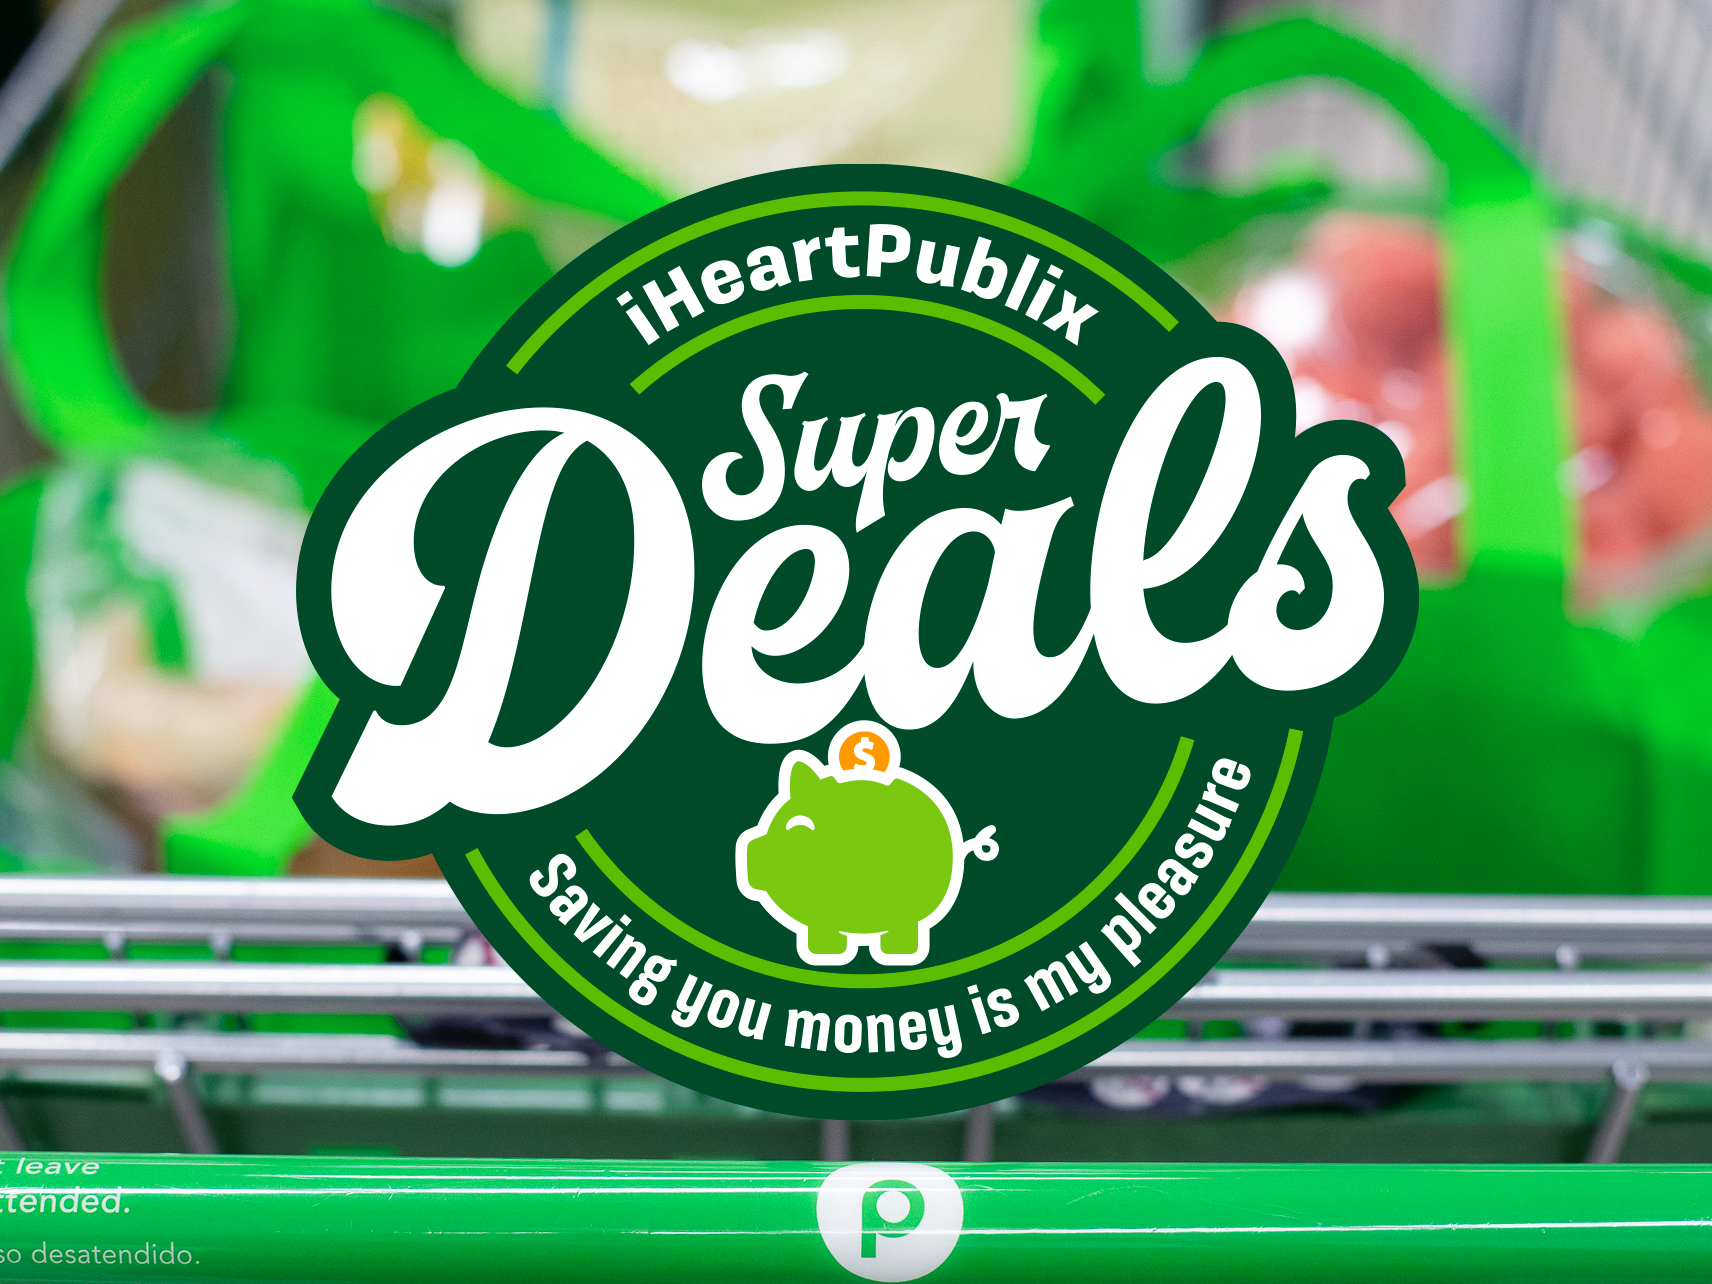 Publix Super Deals Week Of 4/27 to 5/3 (4/26 to 5/2 For Some)